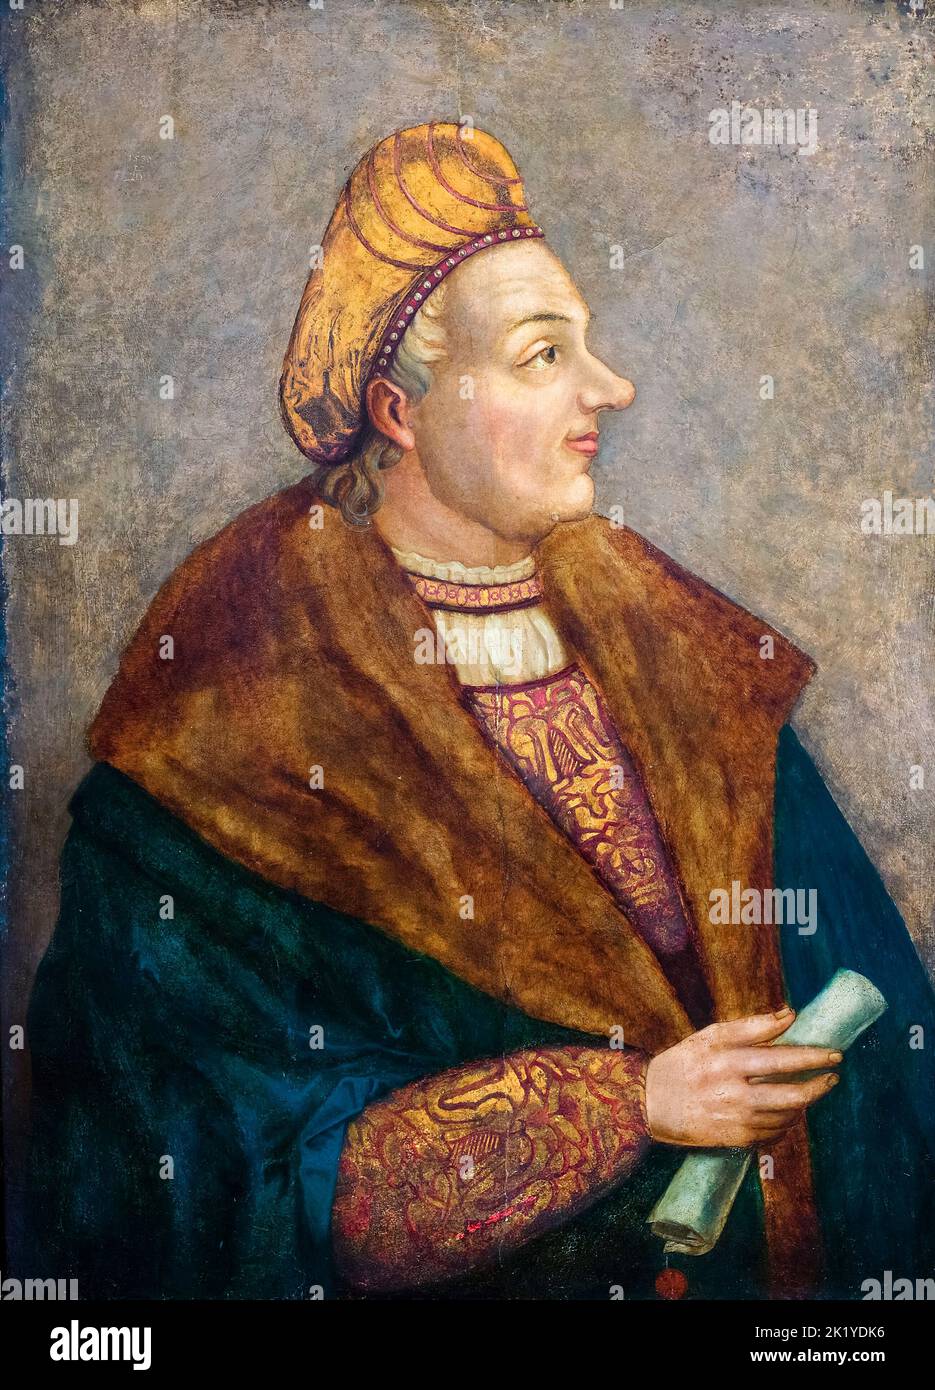 Sigismund I the Old (1467-1548), King of Poland and Grand Duke of Lithuania (1506-1548), portrait painting in oil on wood by Hans Dürer, 1530 Stock Photo